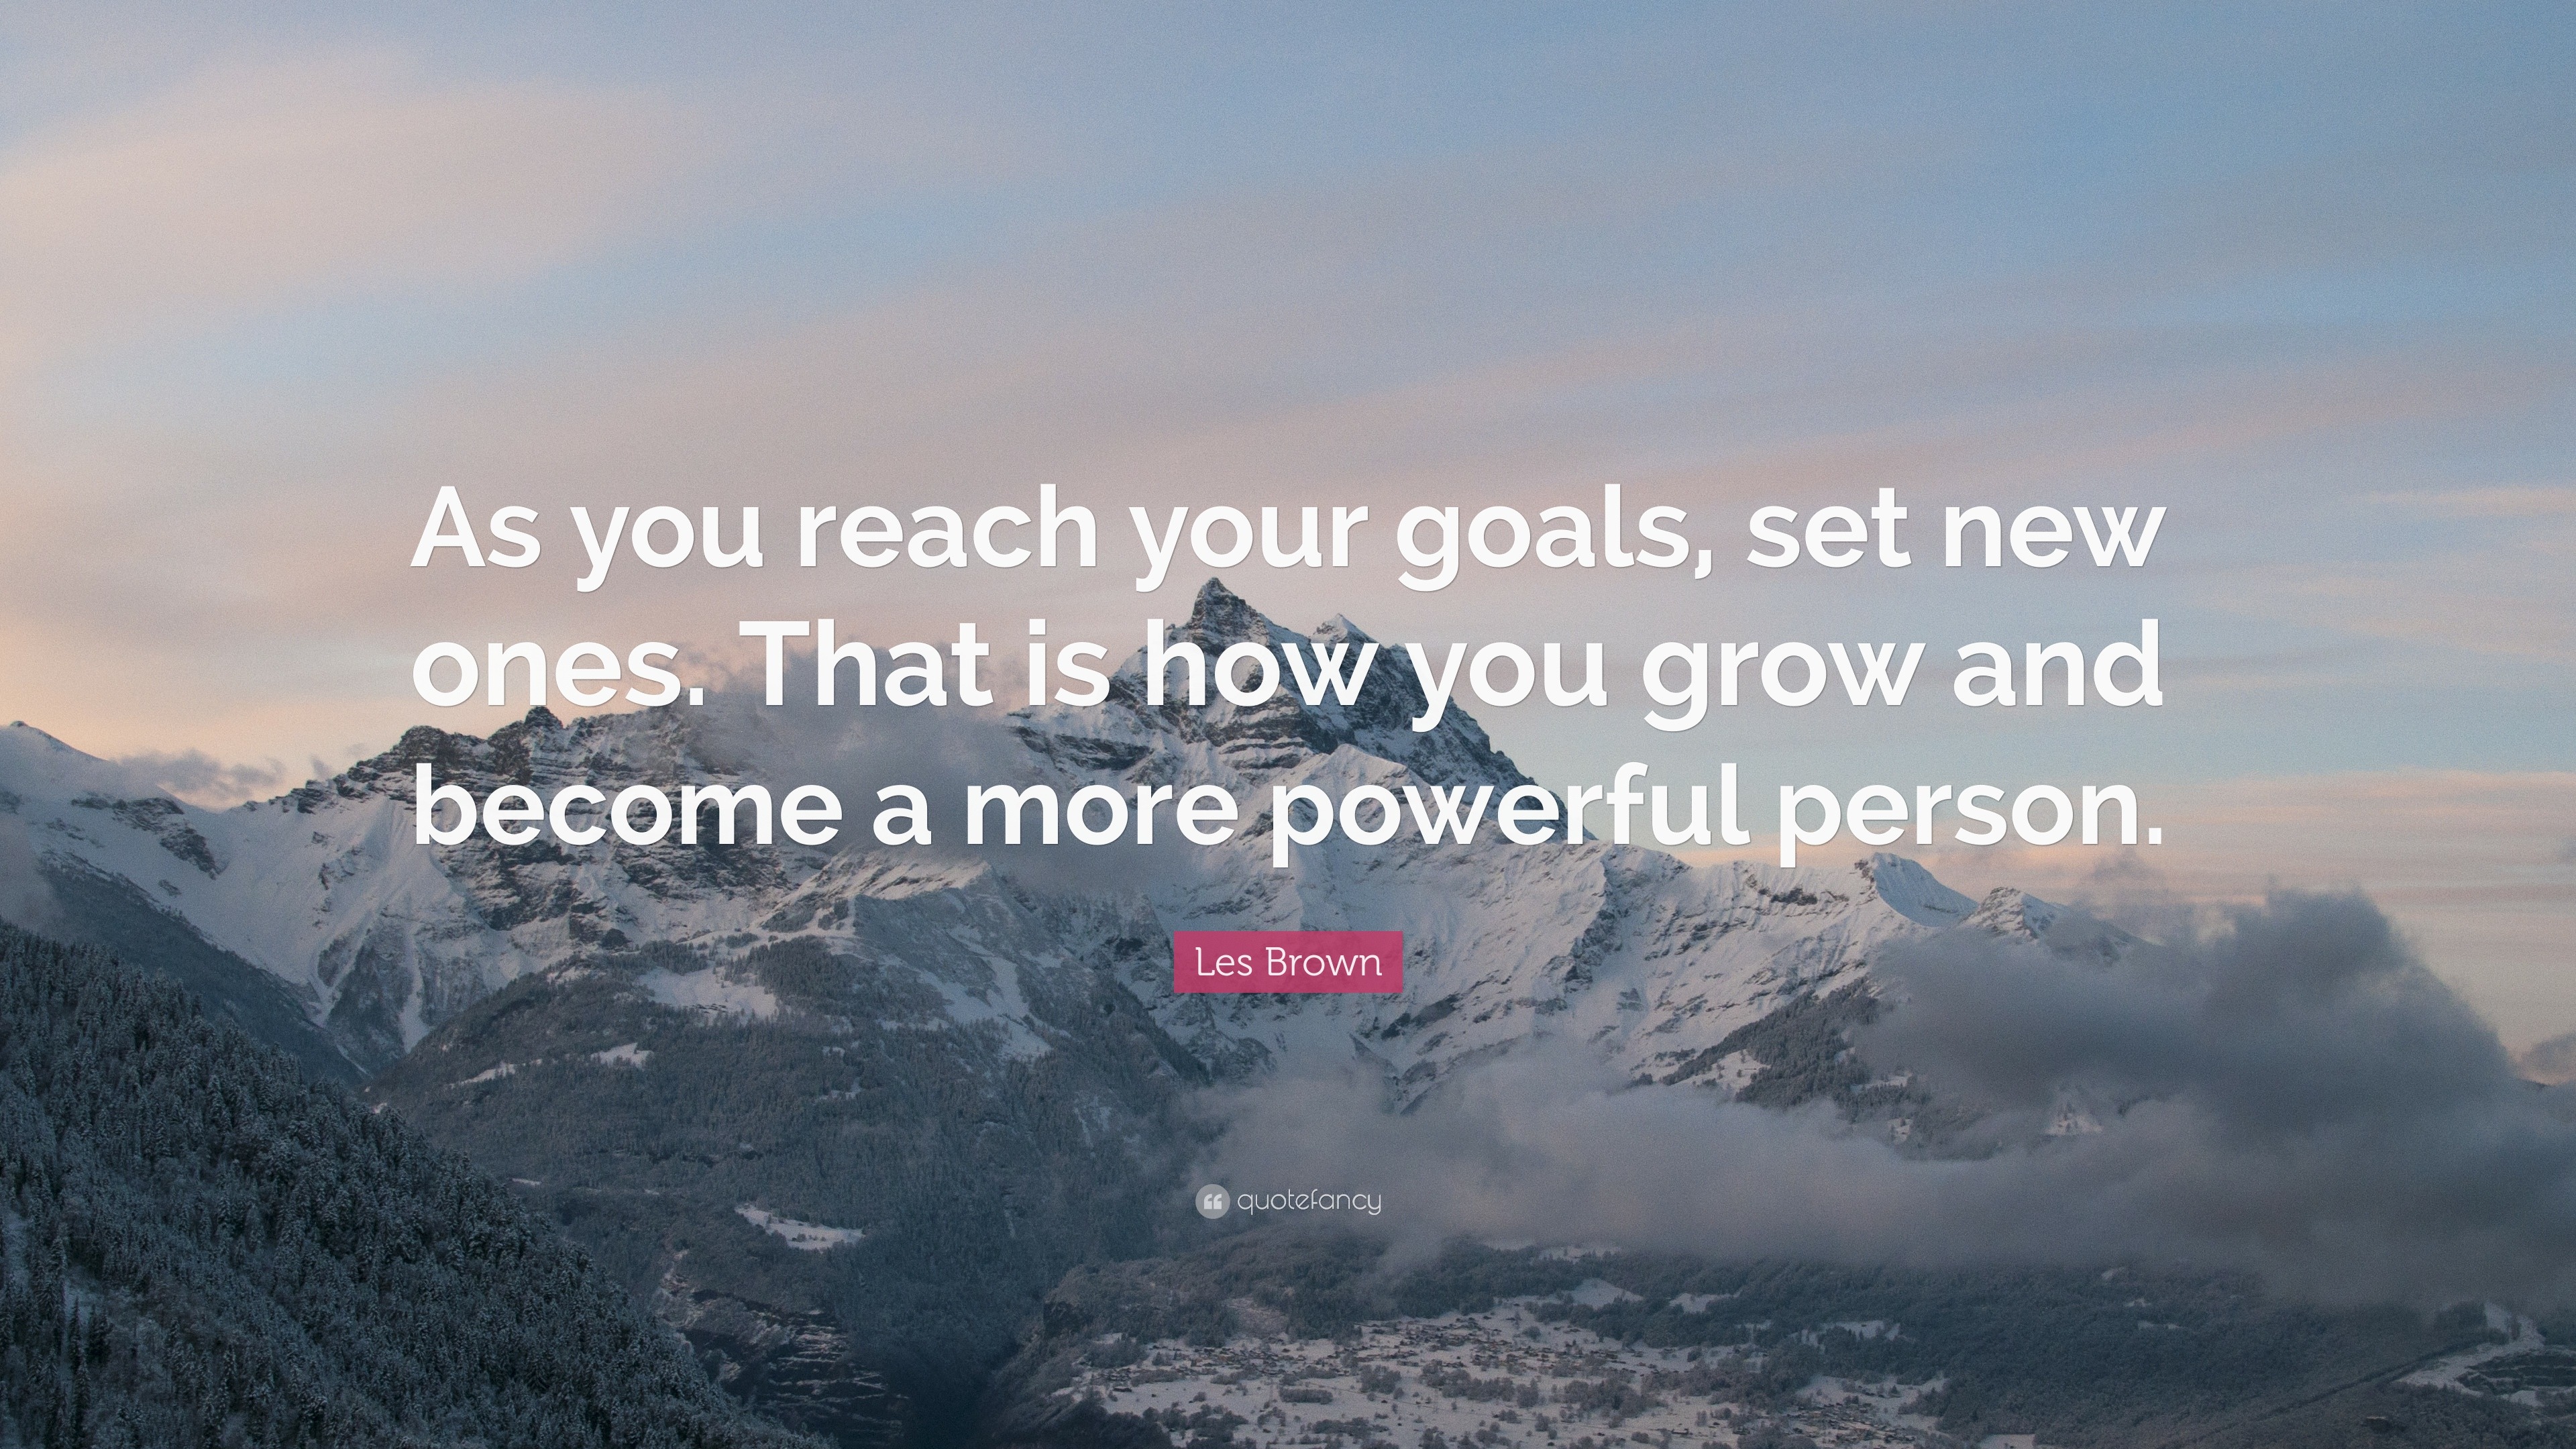 Les Brown Quote: “As you reach your goals, set new ones. That is how ...